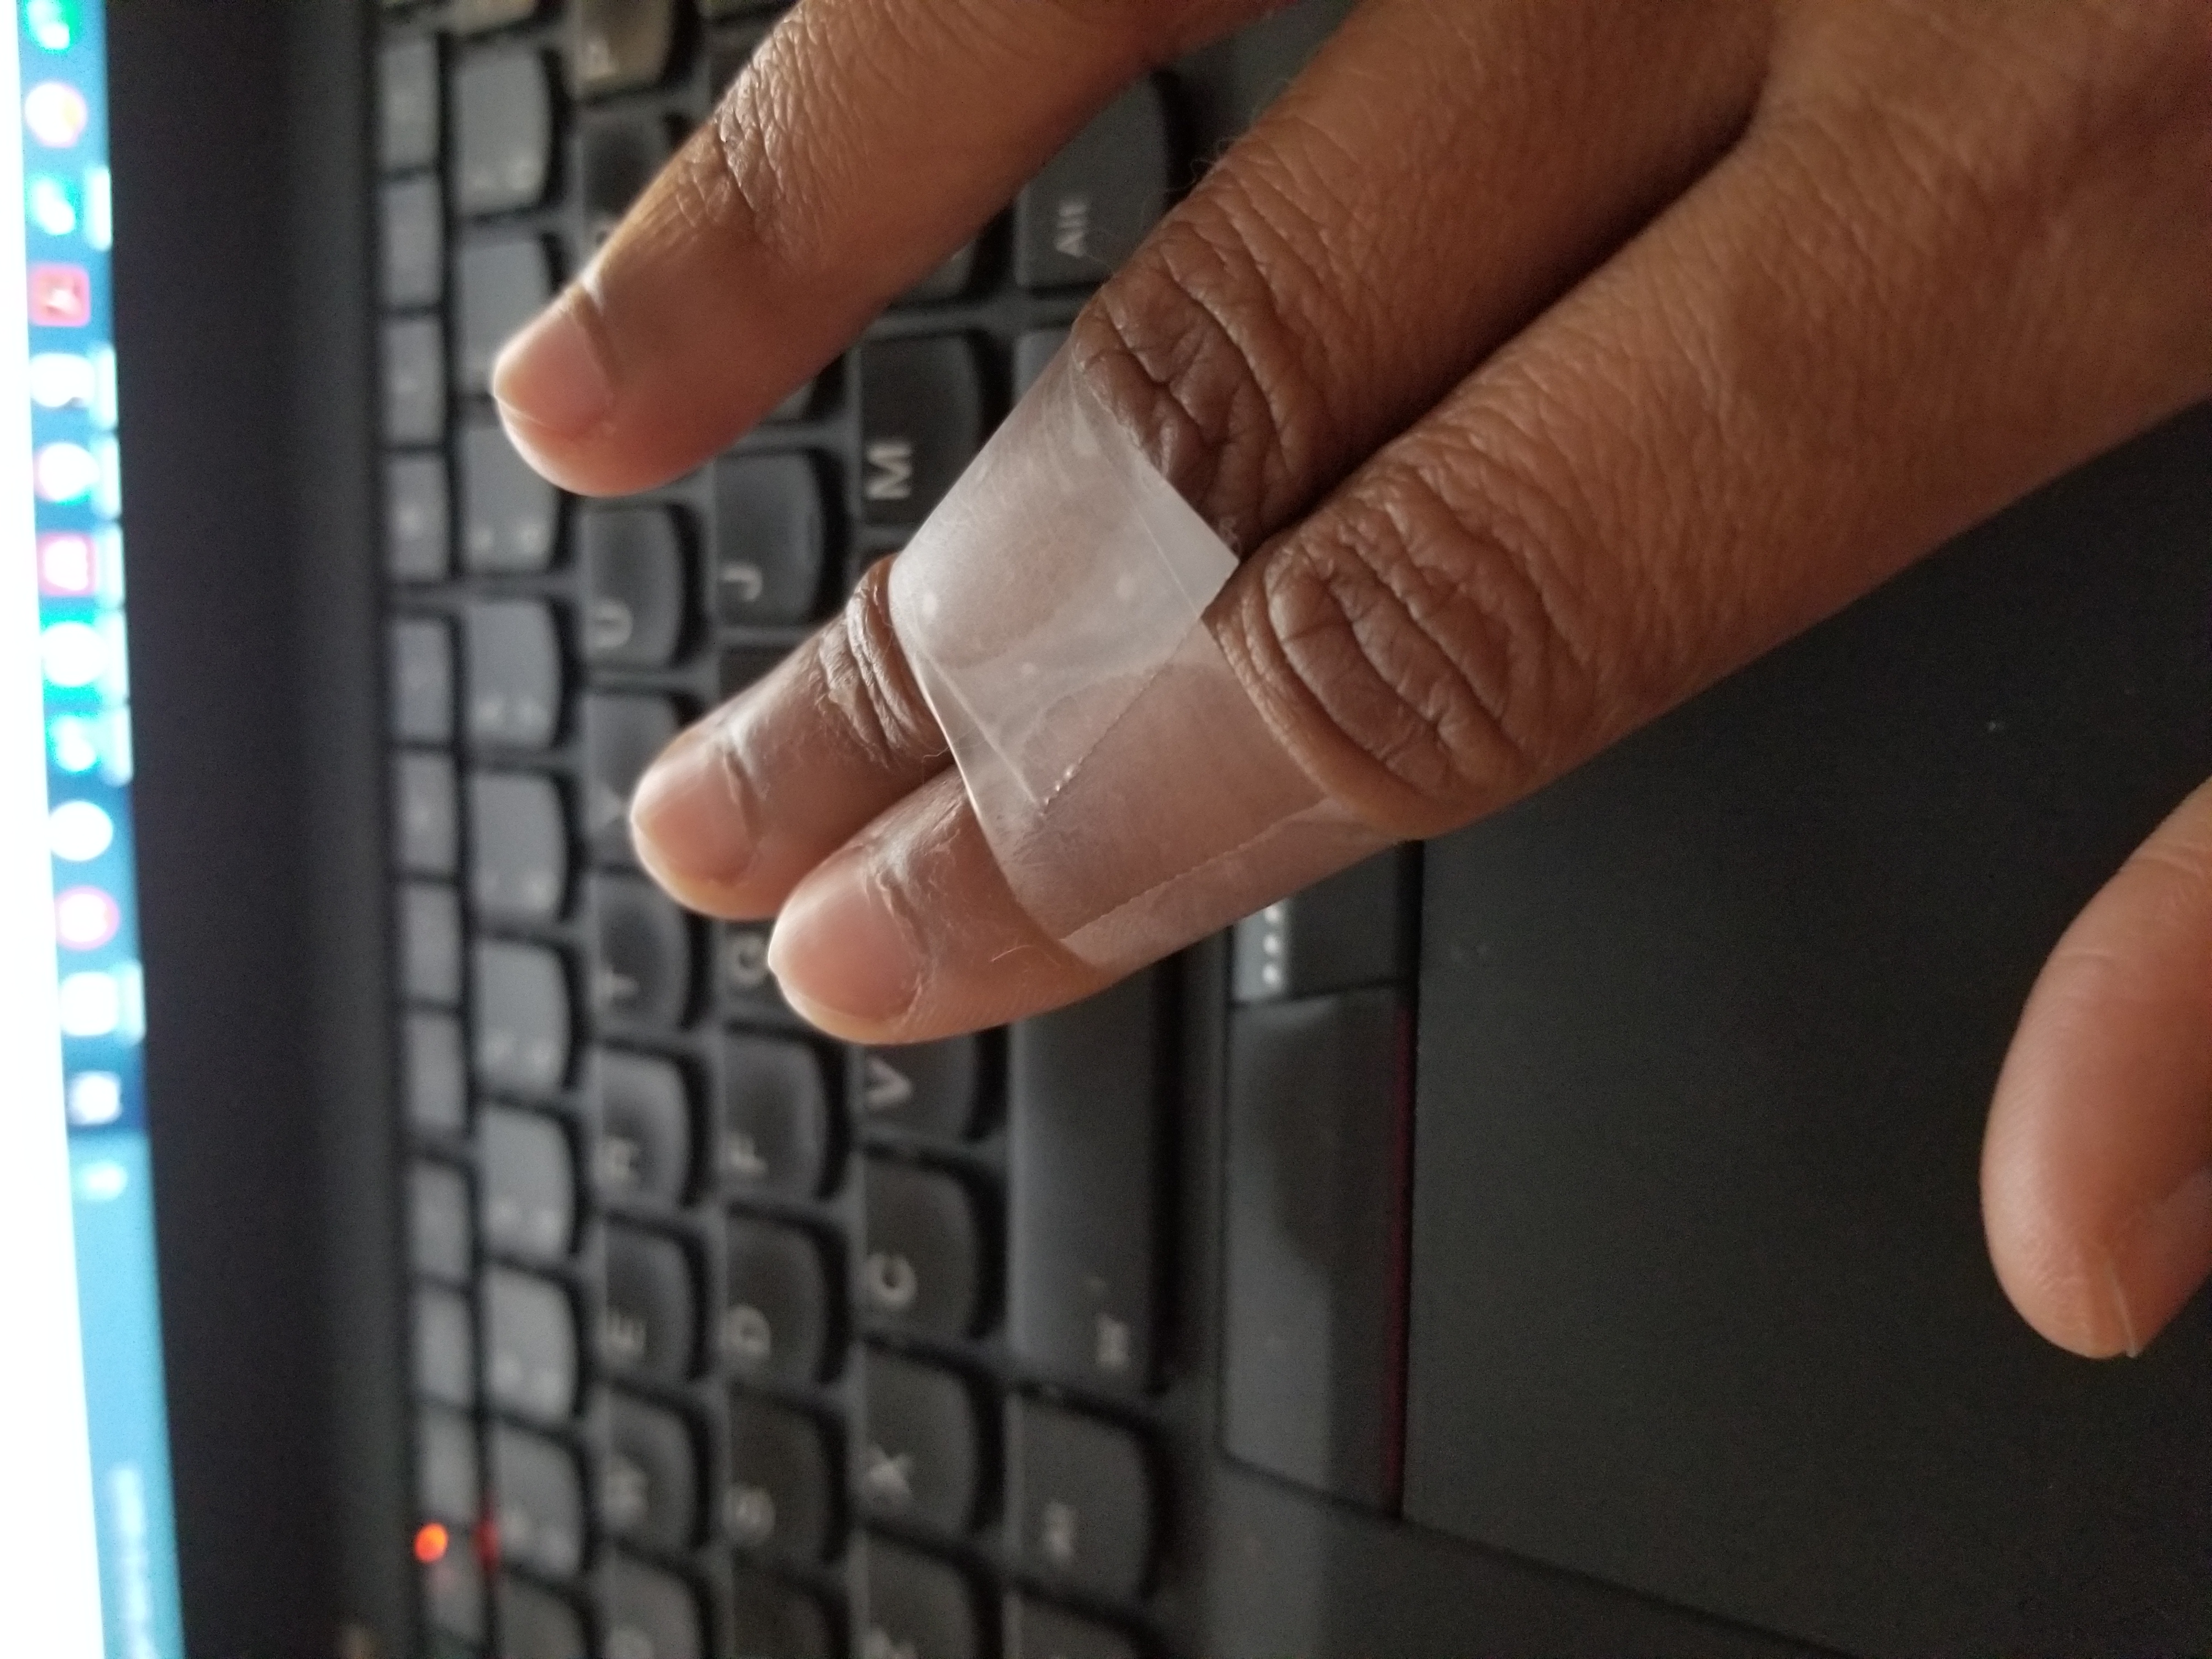 Two fingers splinted together with tape, held above a chiclet laptop keyboard.